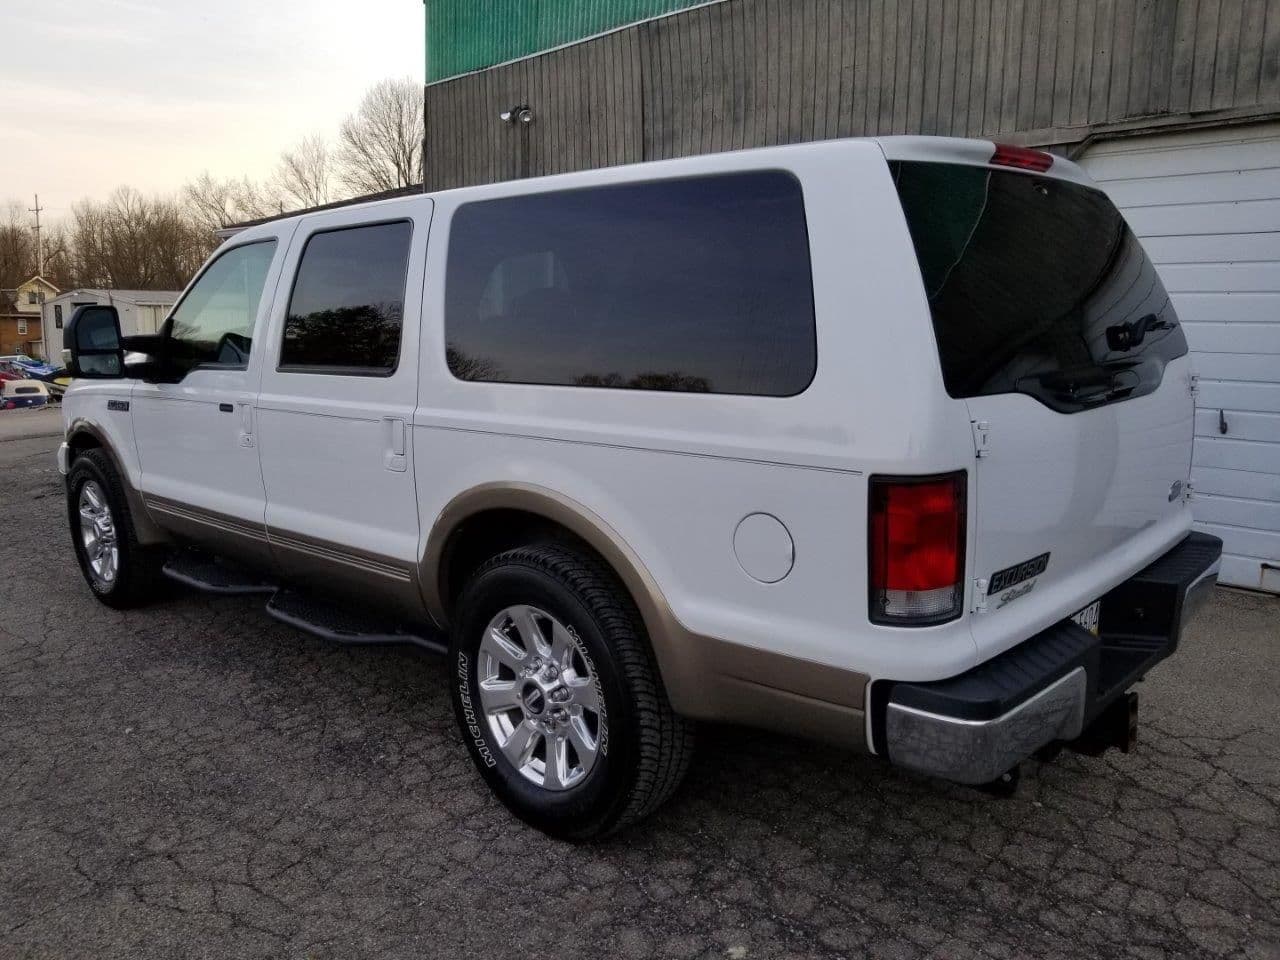 2000 Ford Excursion - 2000 Ford Excursion Limited 2WD *** 55K Miles*** Upgraded One of a Kind ******** - Used - VIN 1FMNU42S9YED59969 - 54,975 Miles - 10 cyl - 2WD - Automatic - SUV - White - Beaver Falls, PA 15010, United States